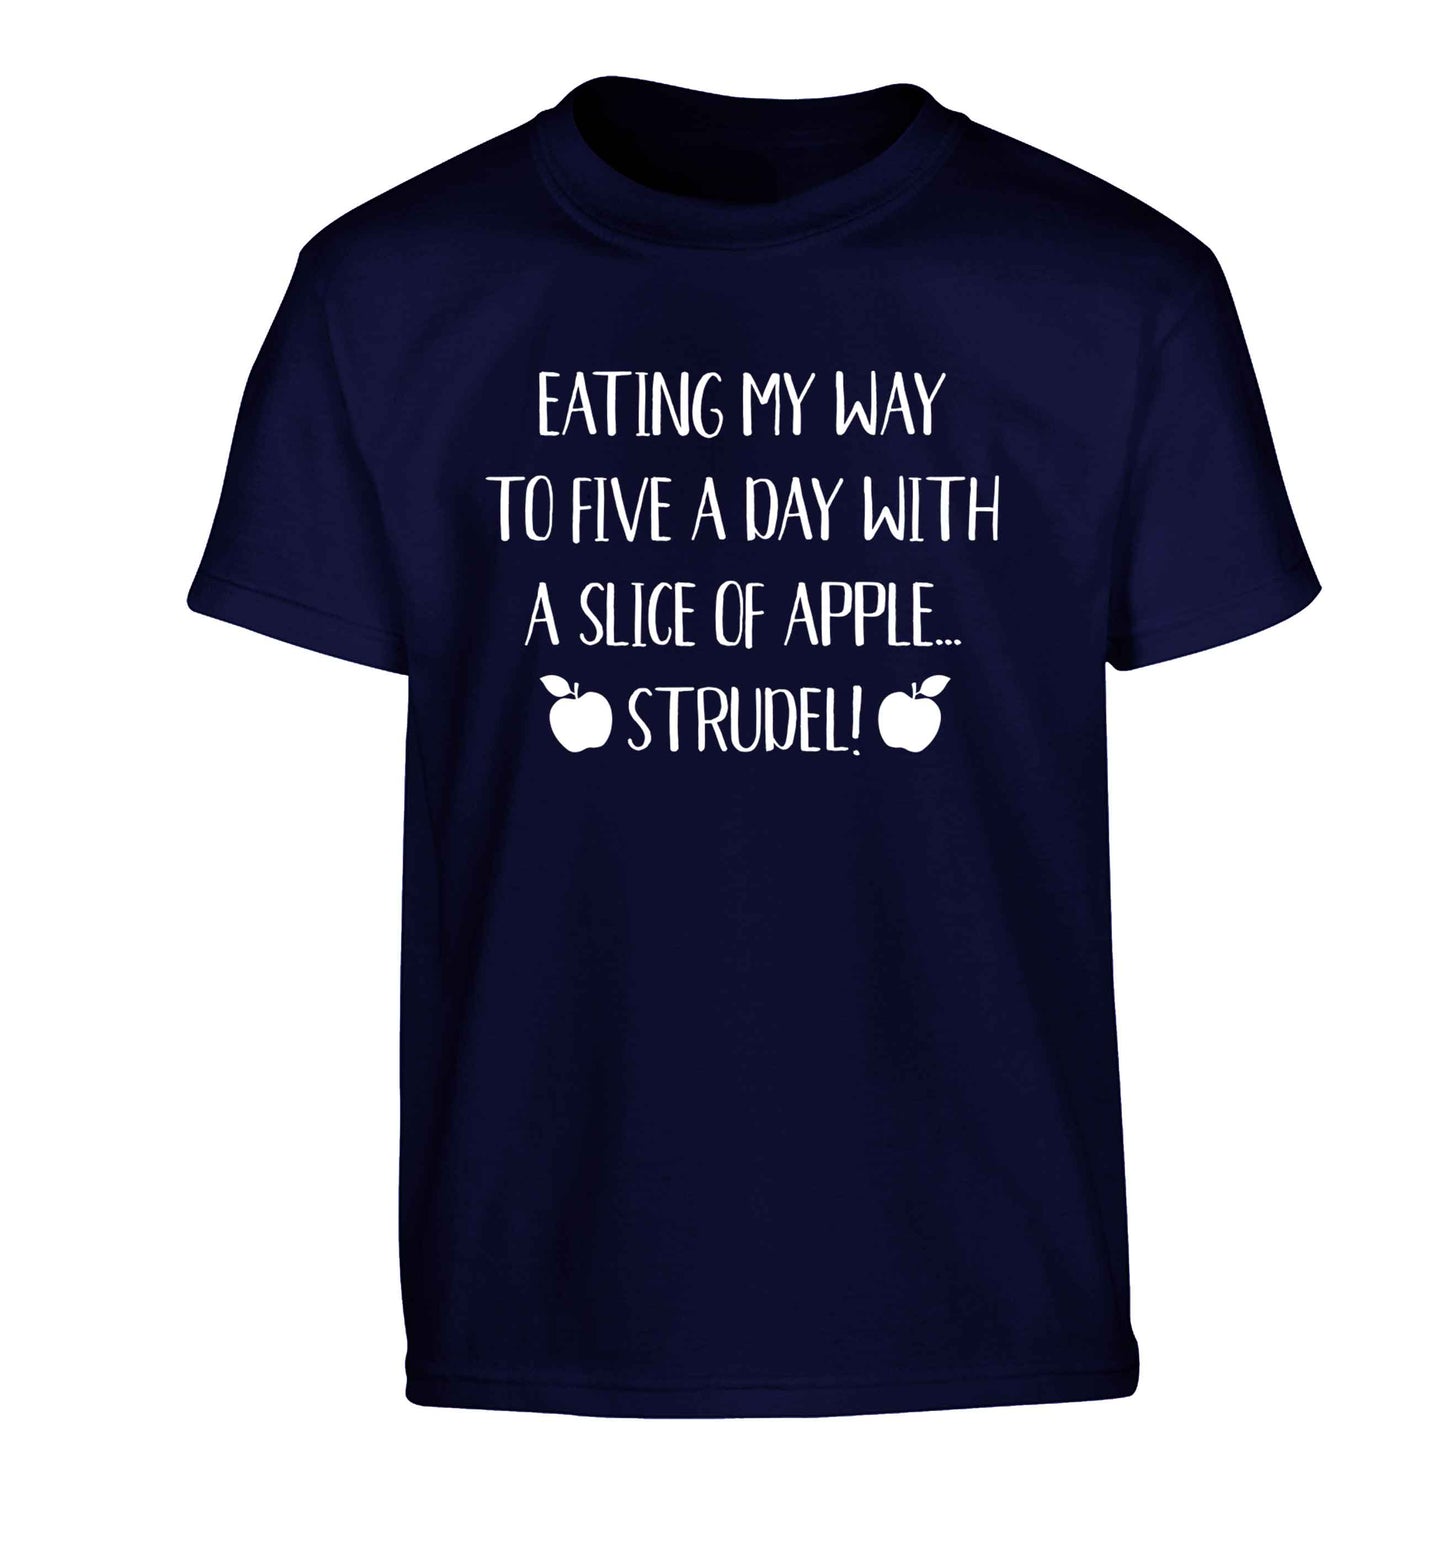 Eating my way to five a day with a slice of apple strudel Children's navy Tshirt 12-13 Years